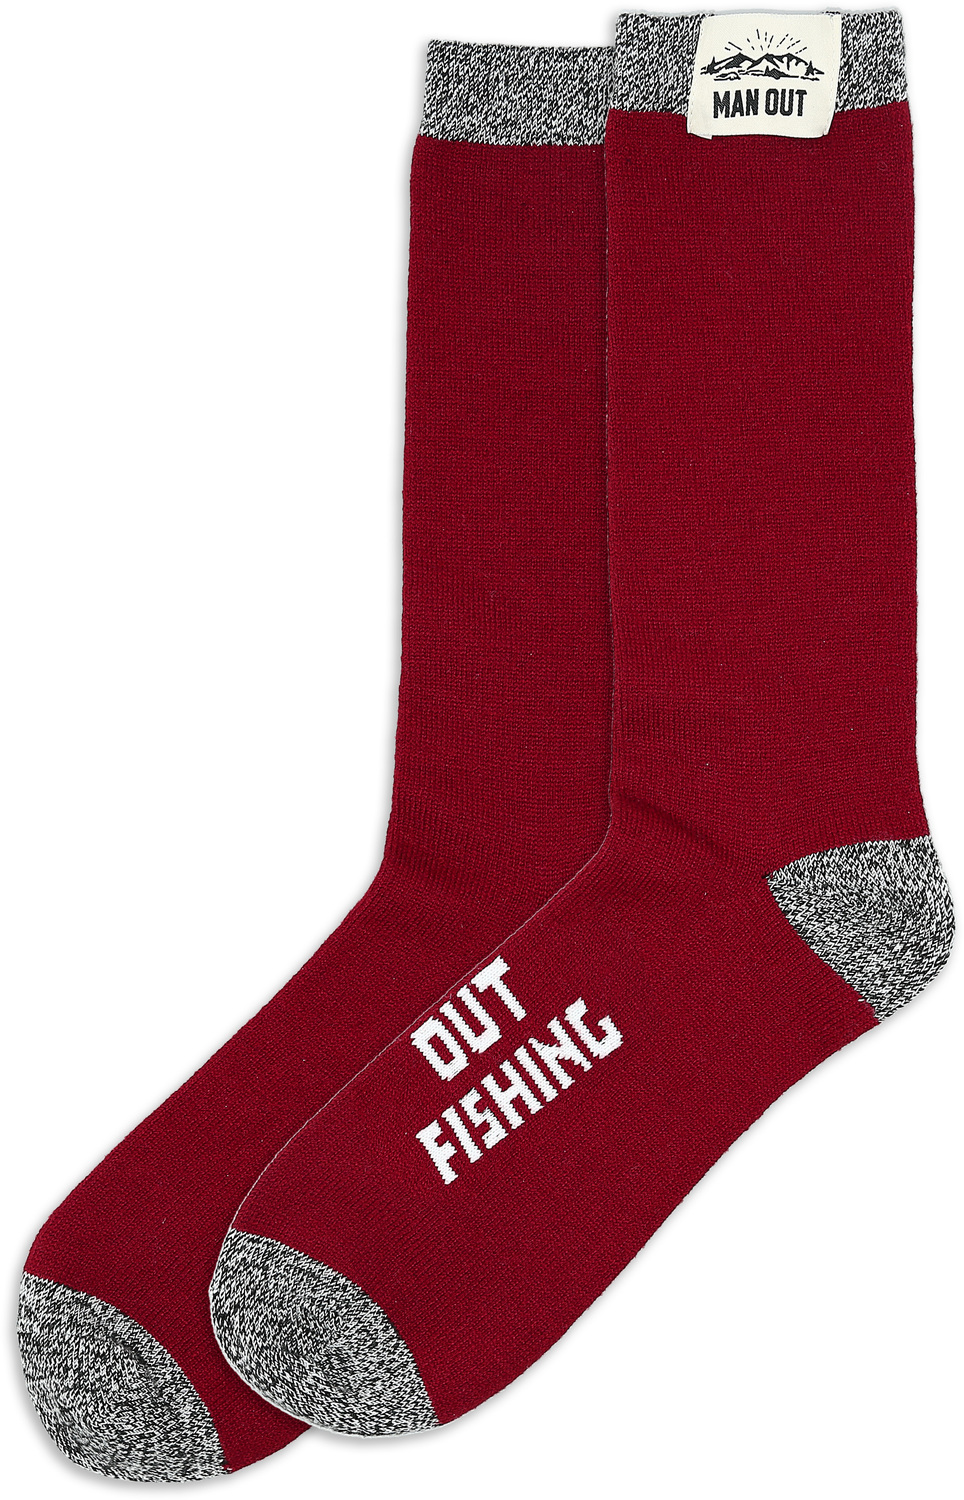 Out Fishing by Man Out - Out Fishing - Men's Socks